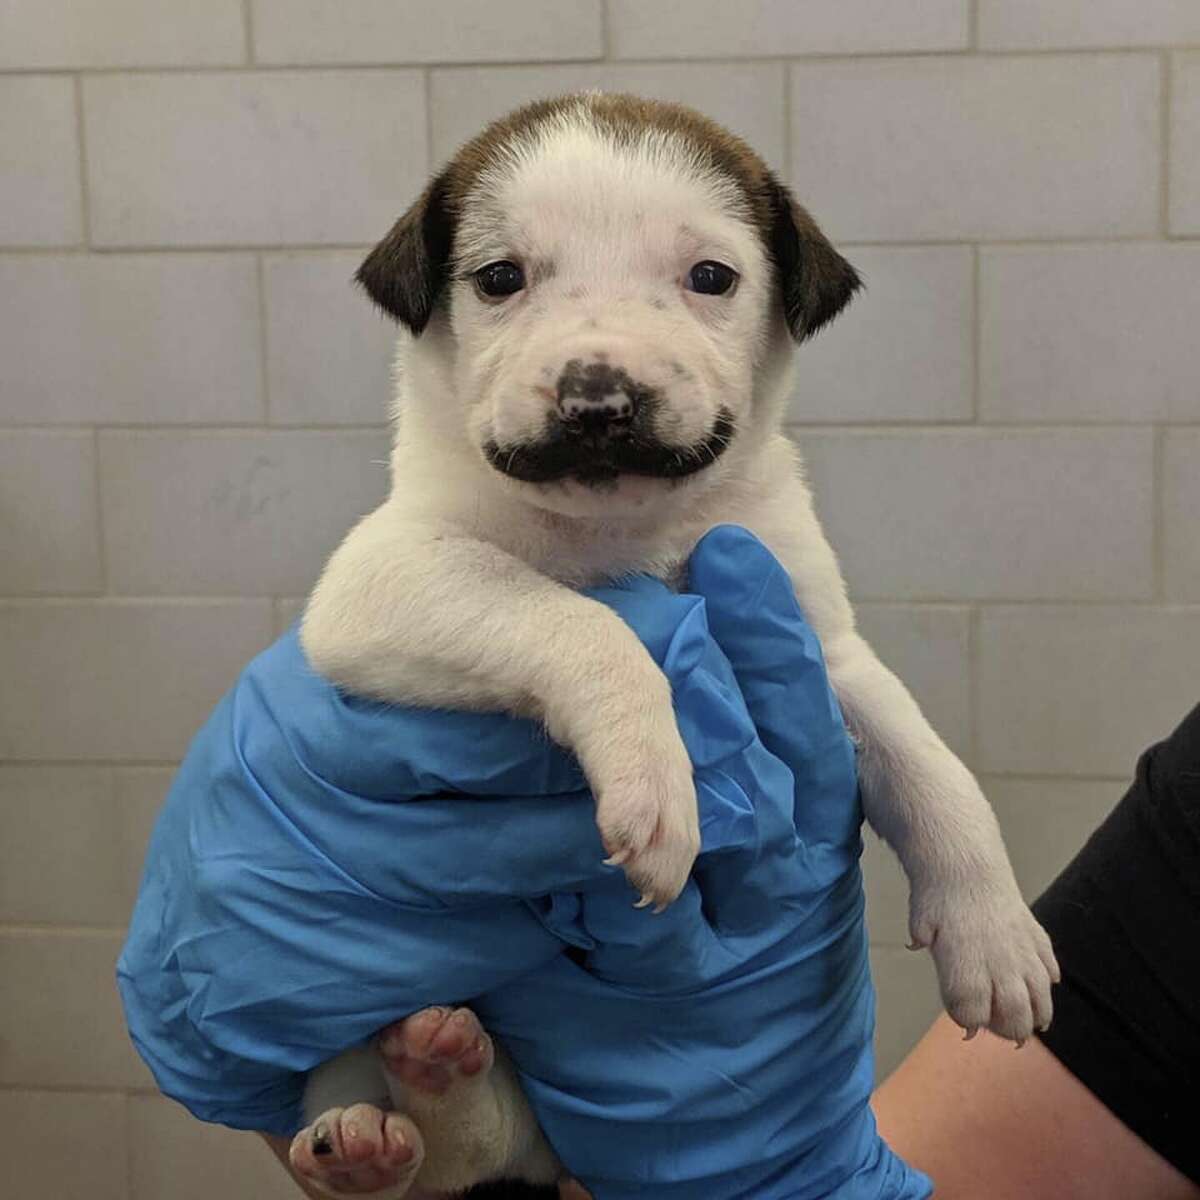 Salvador Dolly is a five-week-old shepherd mutt that has captured the hearts of people everywhere for her unusual face marking - a handlebar mustache.>>>See more for photos of Dolly's family... Photo courtesy Hearts & Bones Animal Rescue